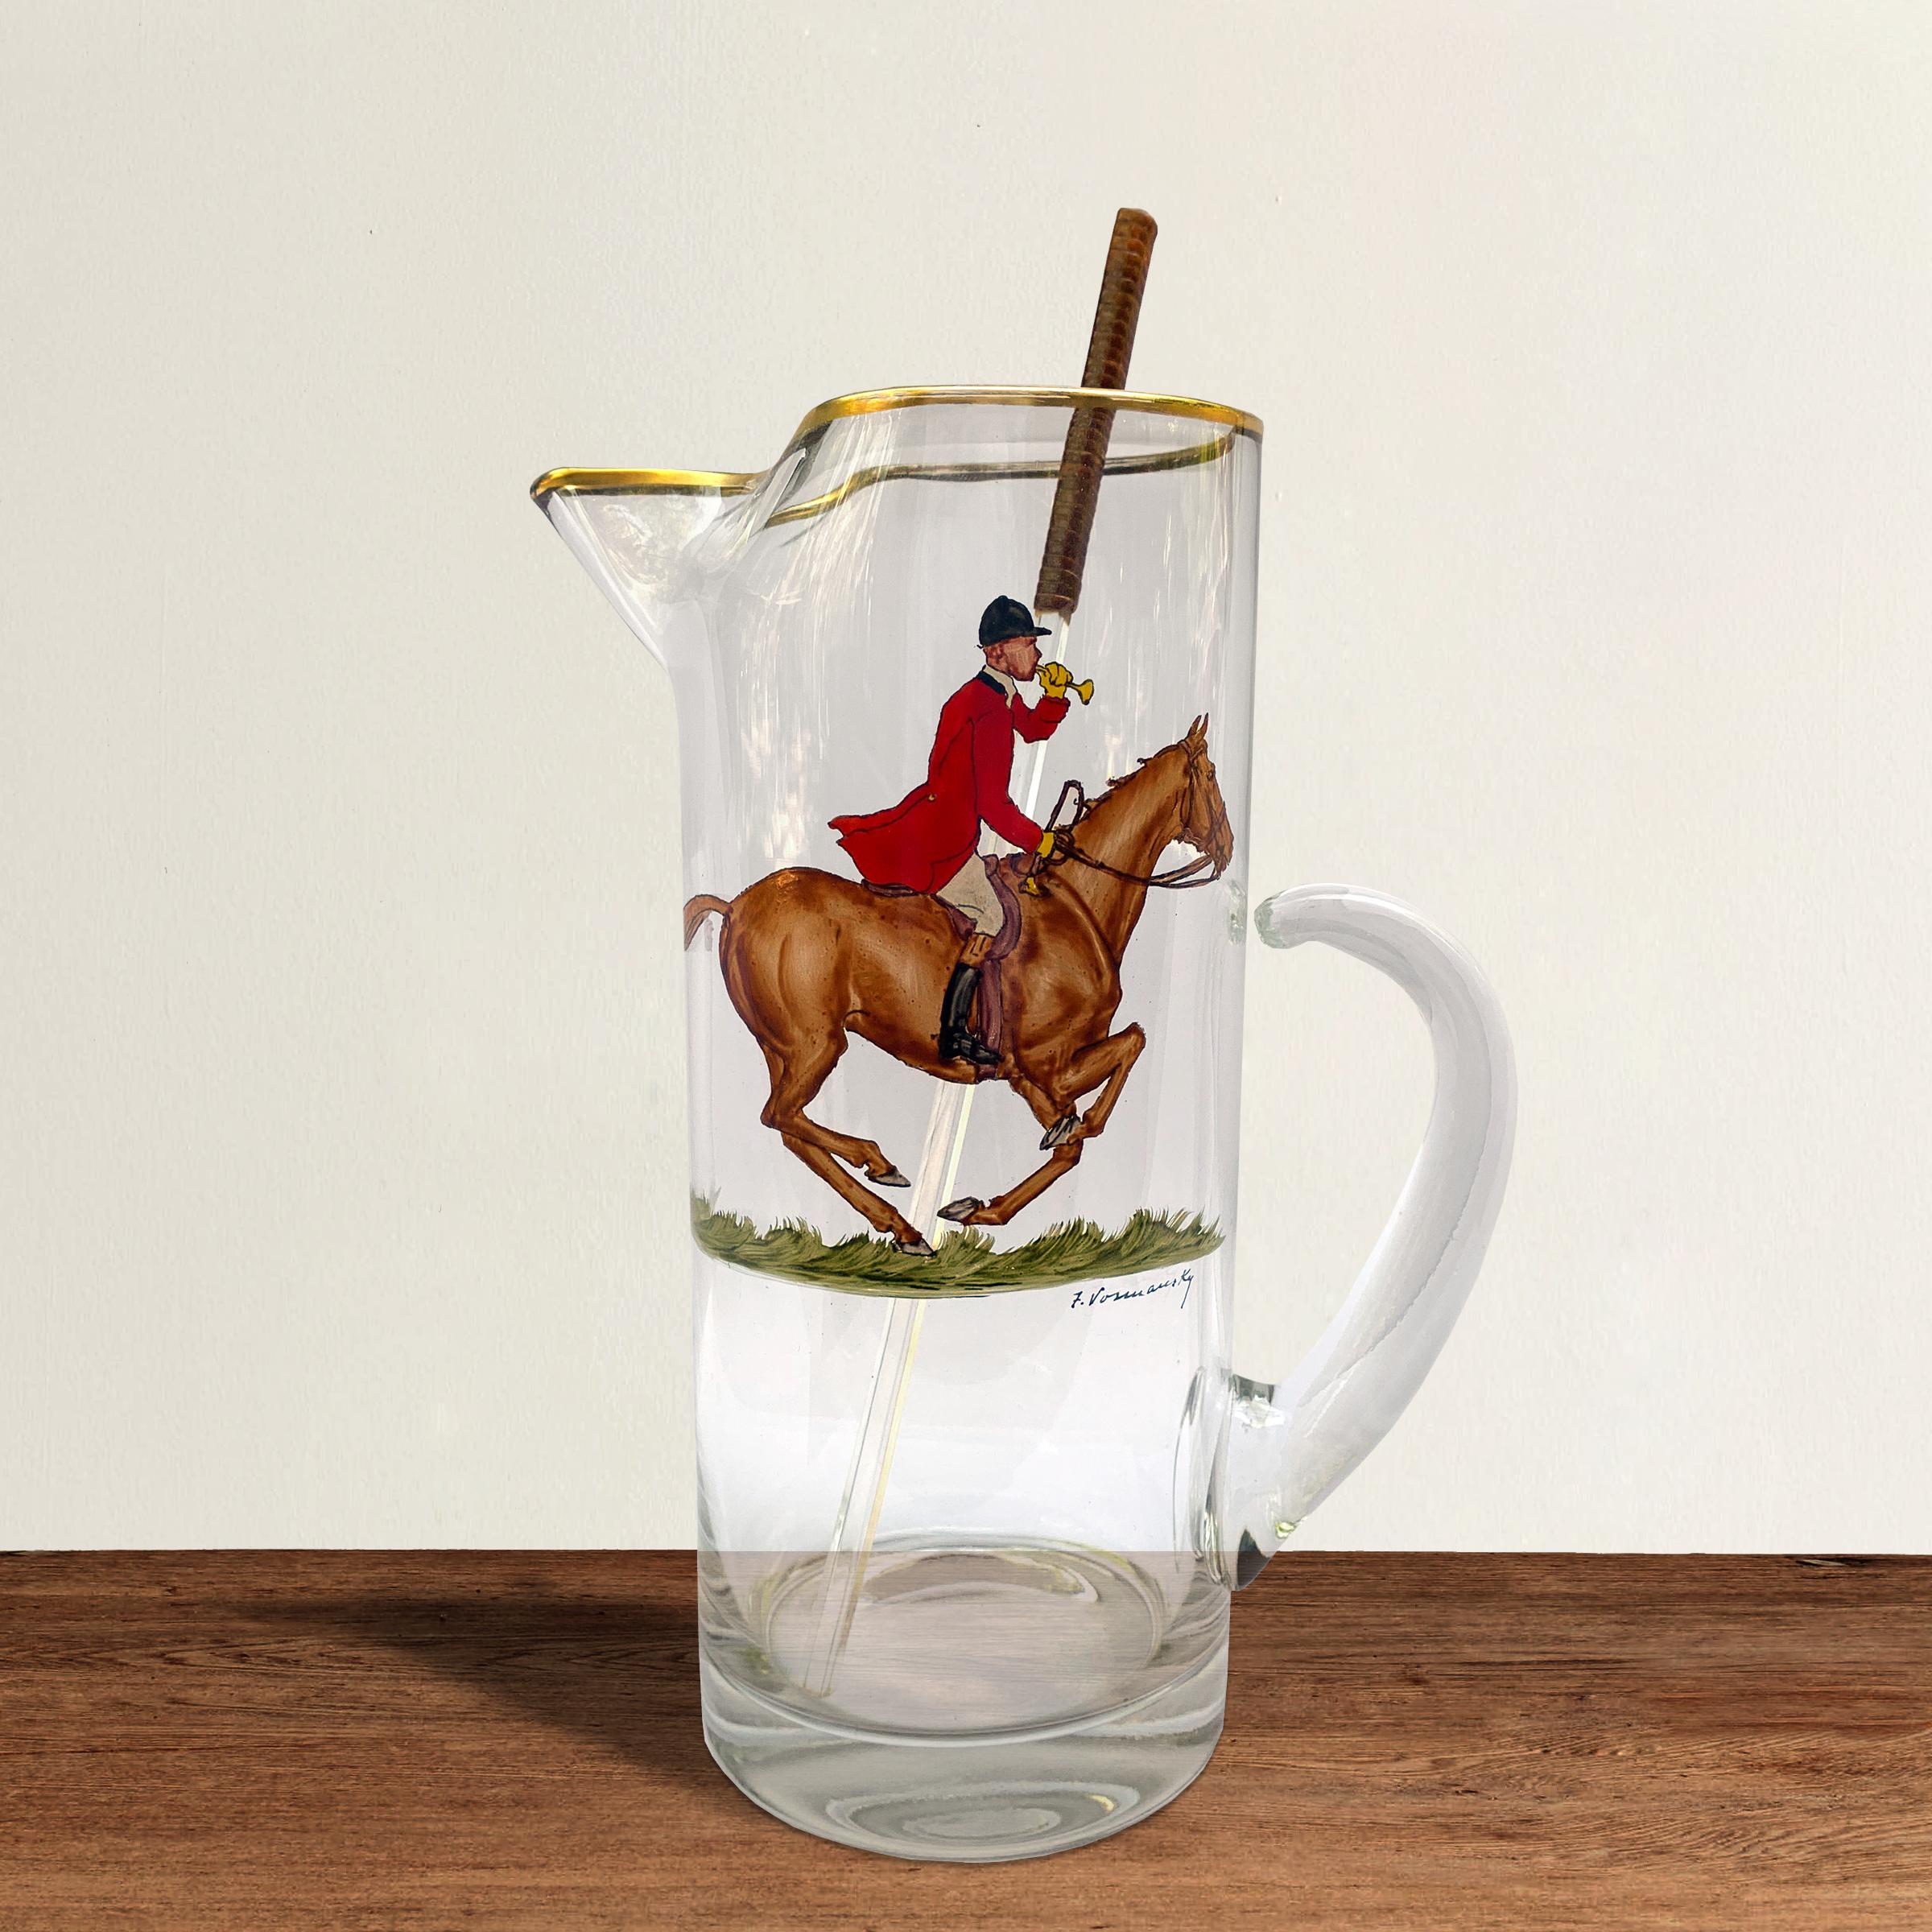 A wonderful vintage glass drinks pitcher with a hand painted mounted hunt master with Horn in hand, with a leather wrapped Lucite stir stick. This pitcher was purchased at the original Abercrombie & Fitch in NYC in the 1960s.